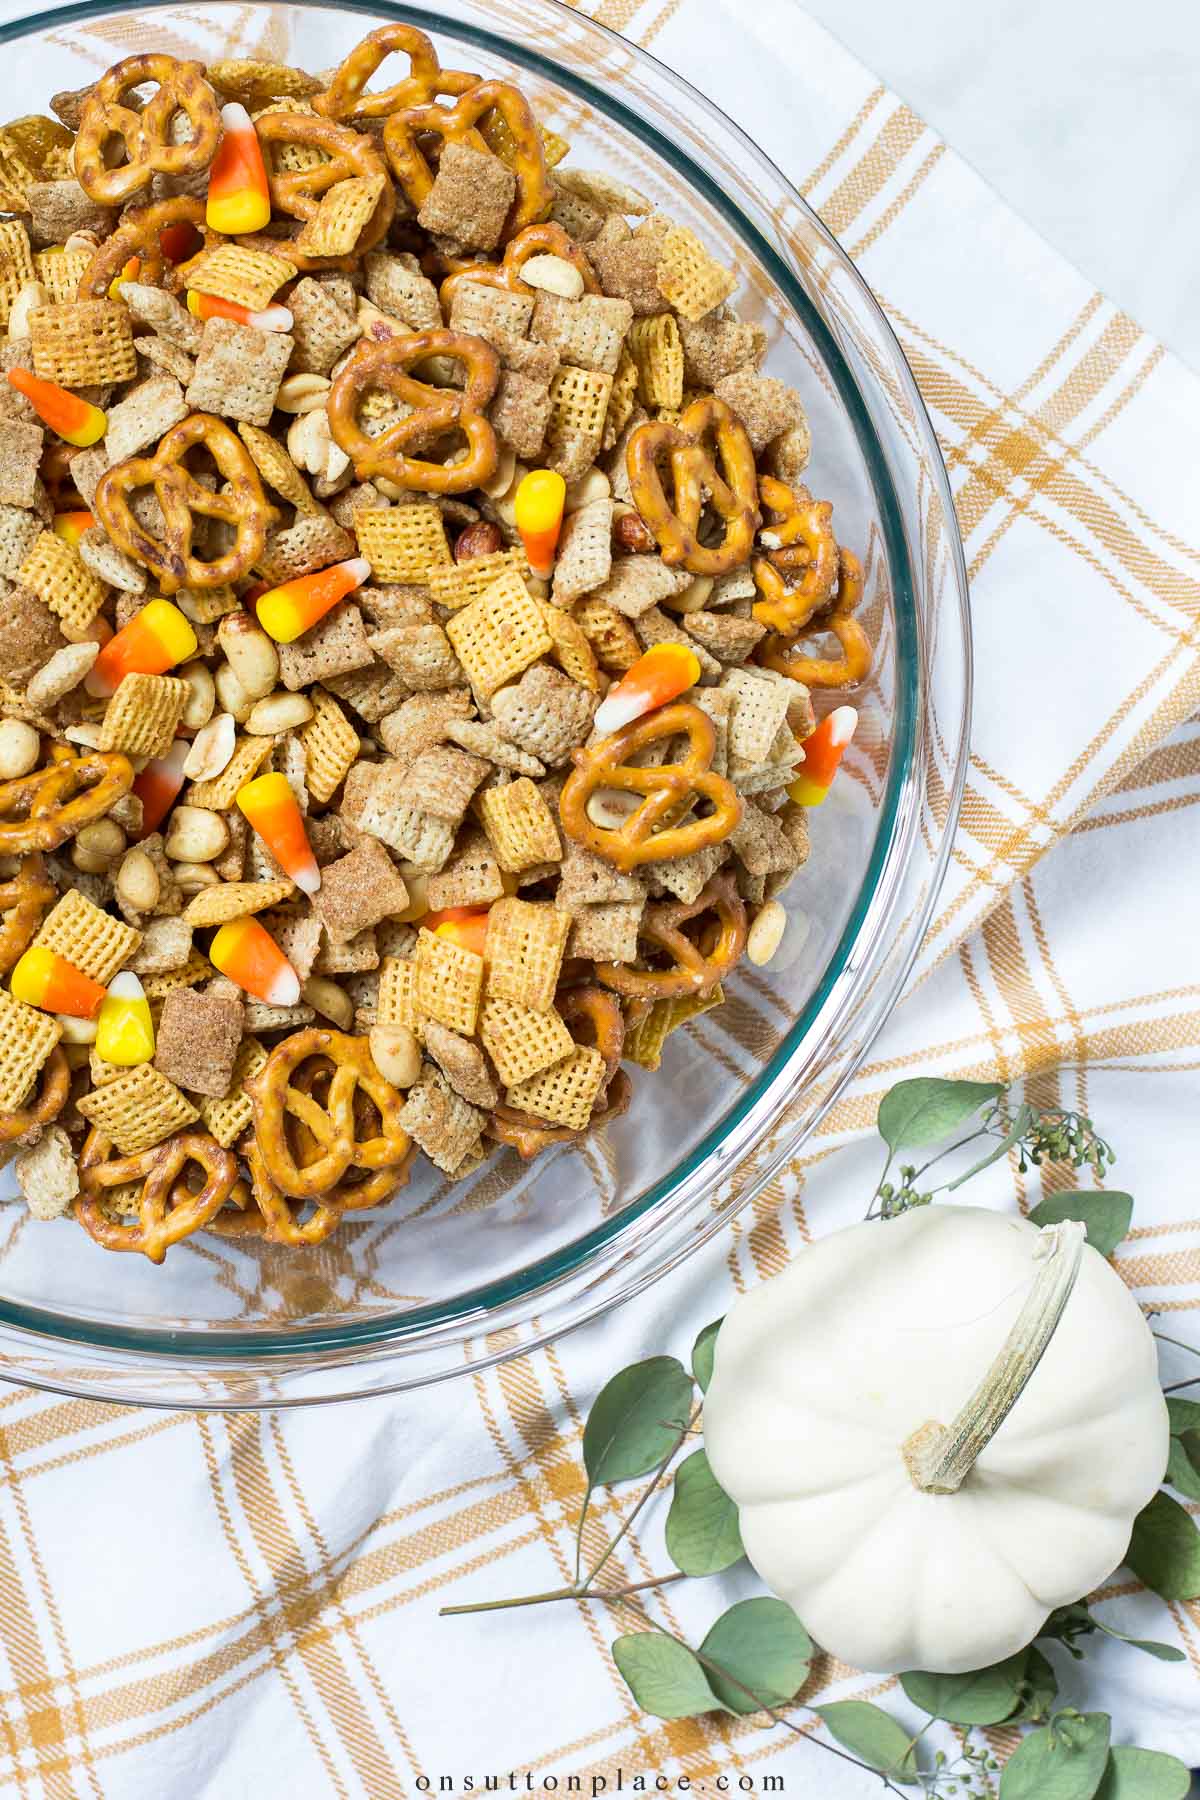 https://www.onsuttonplace.com/wp-content/uploads/2023/09/sweet-chex-mix-in-large-bowl-2023.jpg